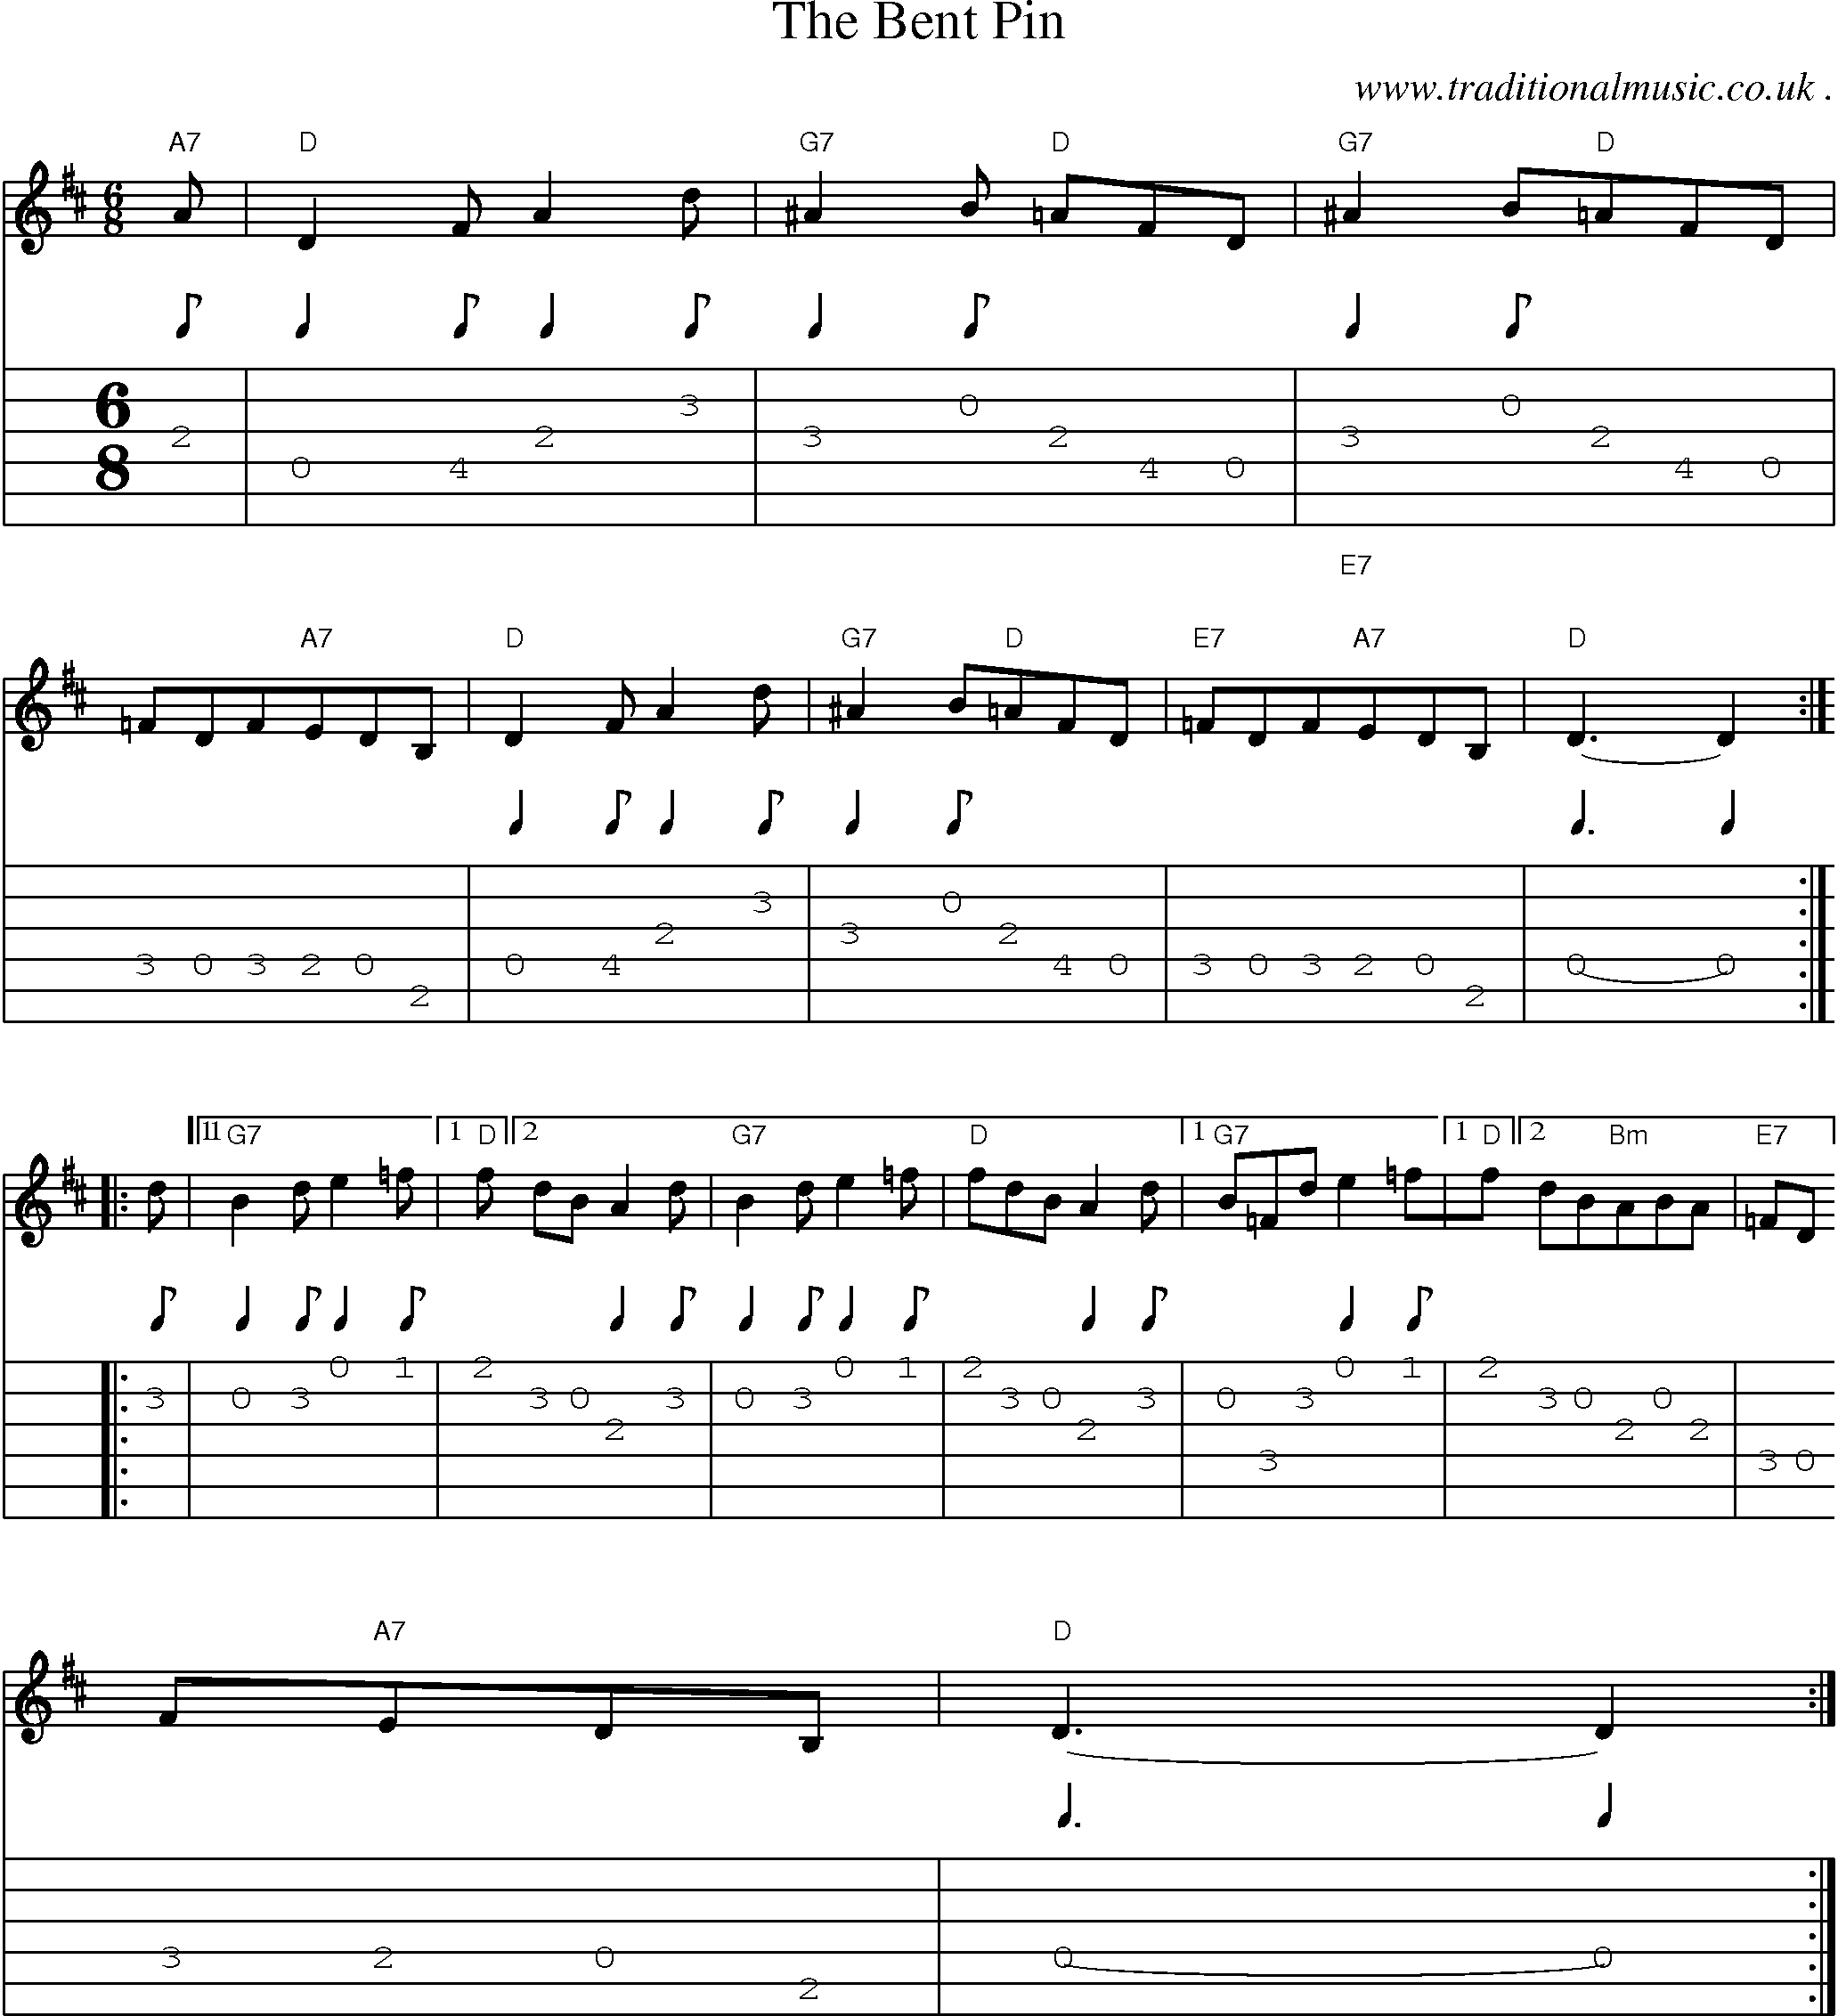 Sheet-Music and Guitar Tabs for The Bent Pin